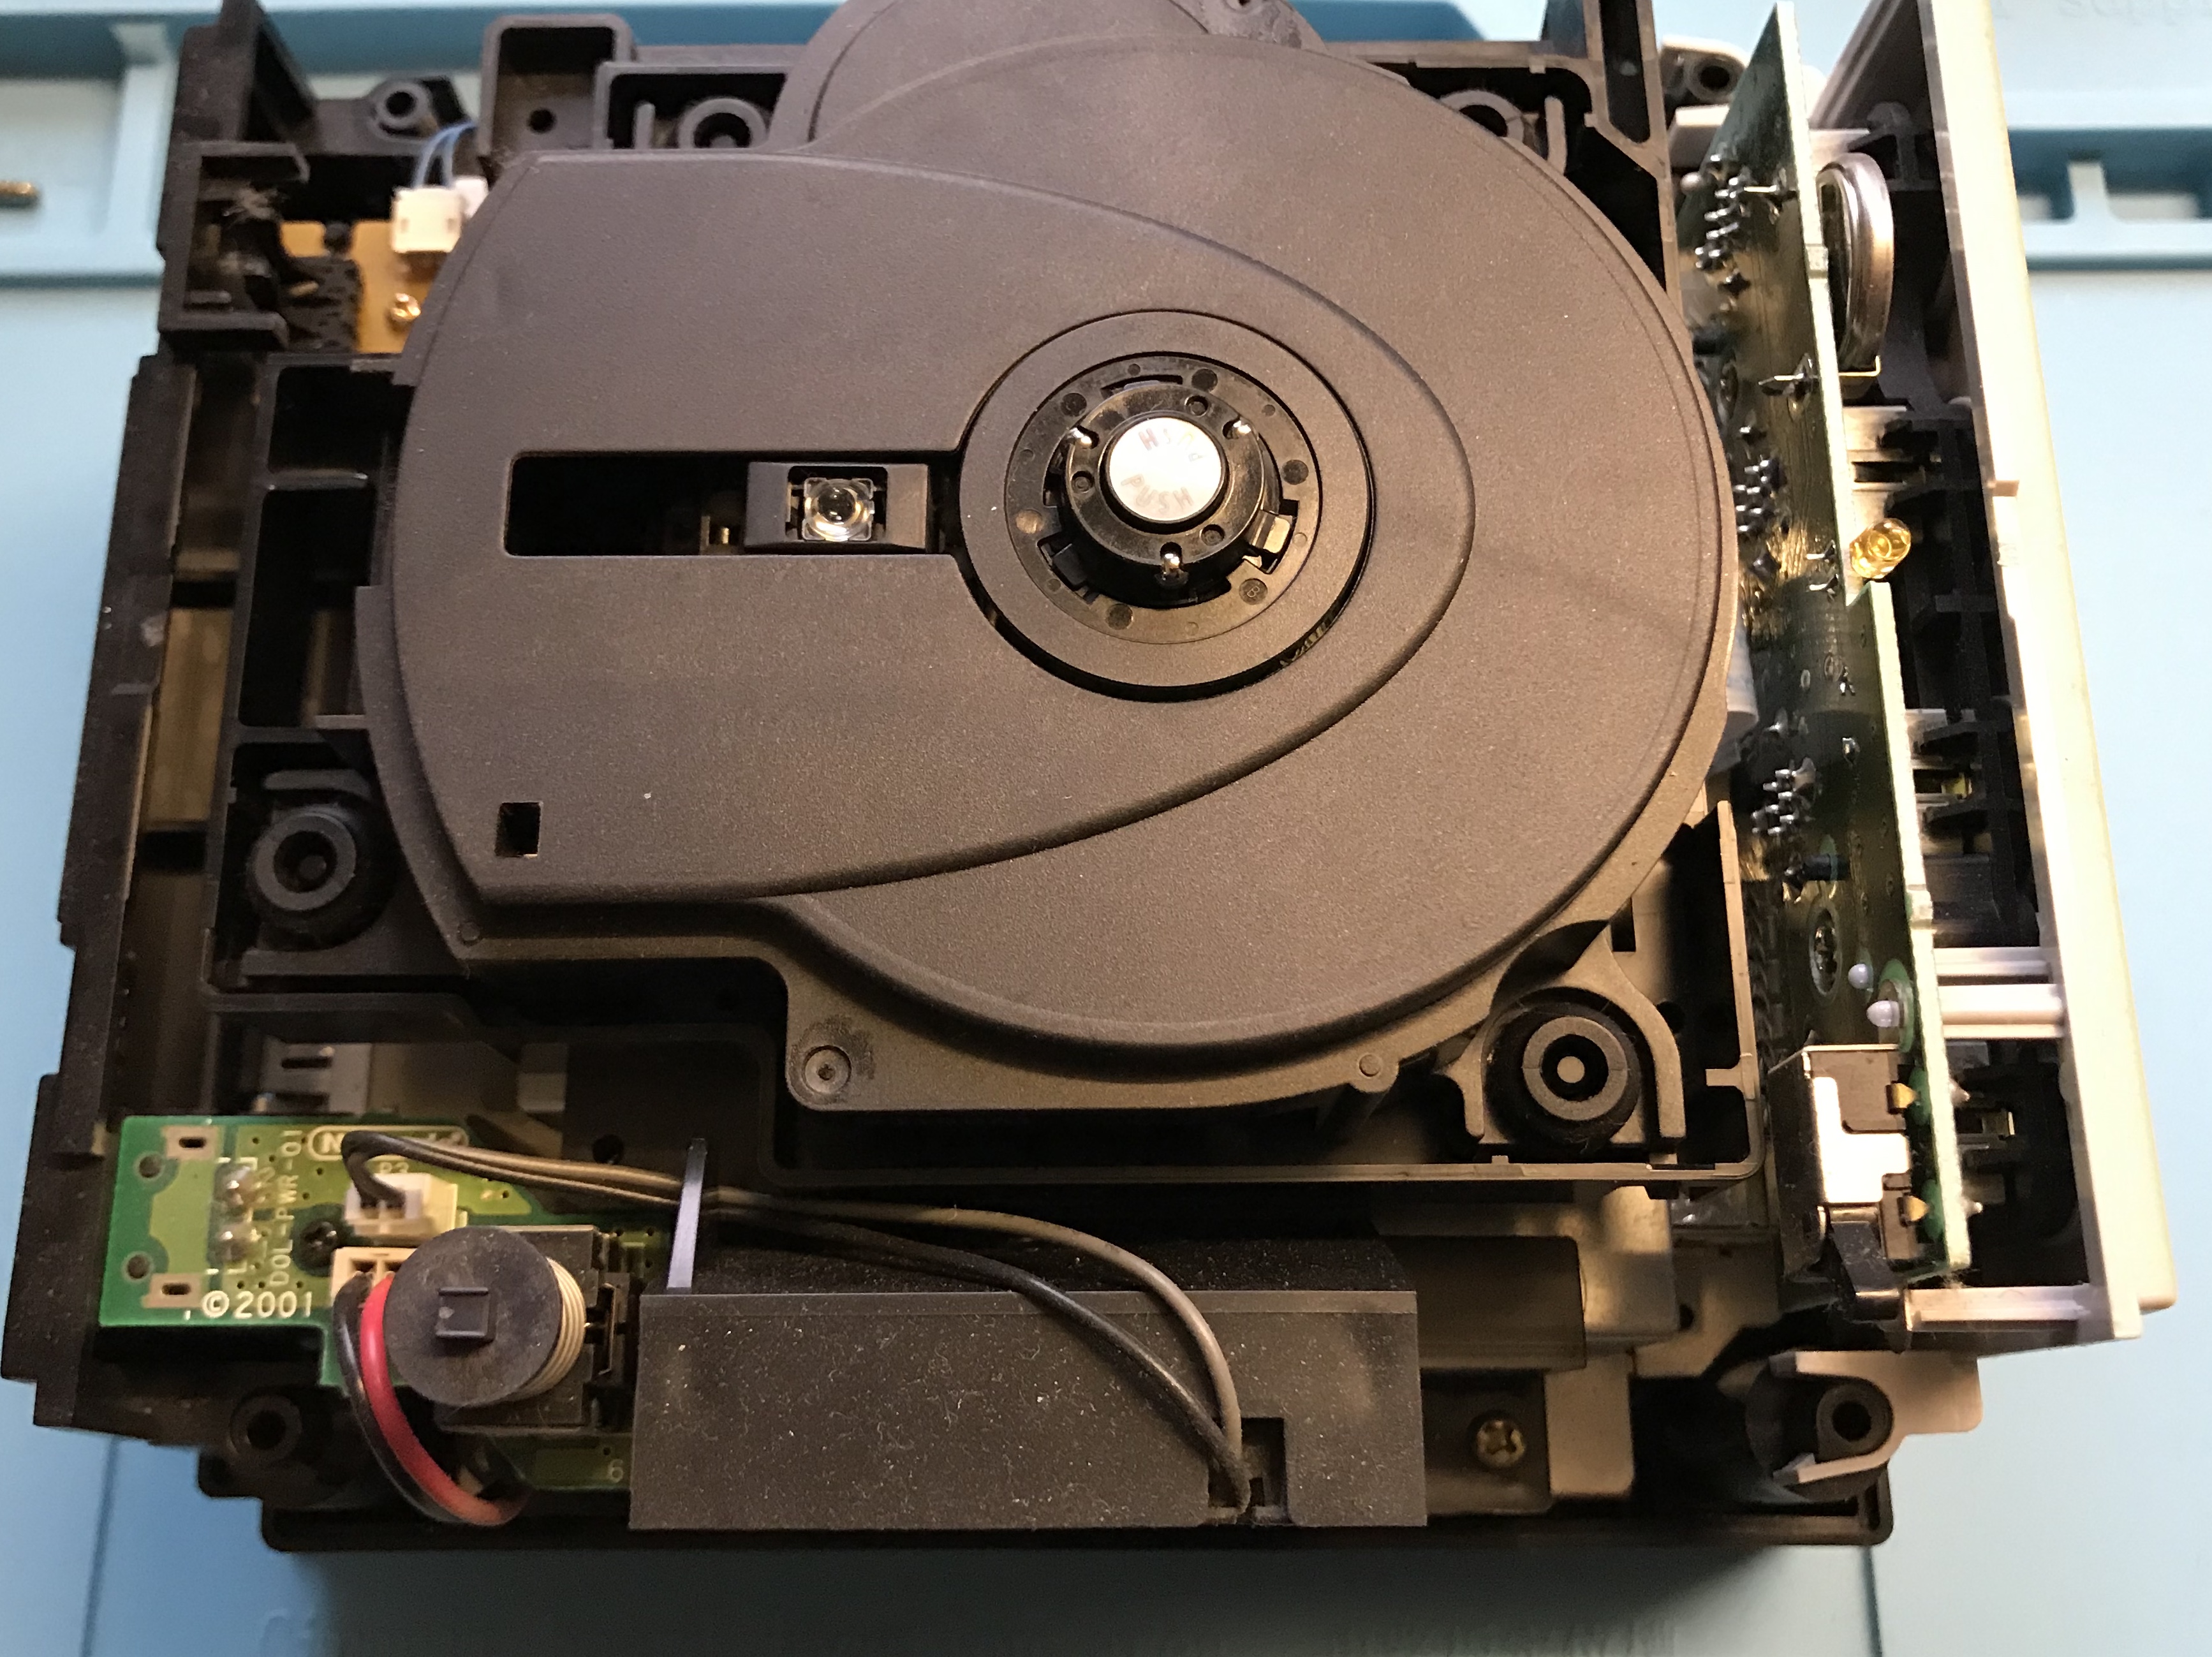 GameCube top case removed to give accesss to fan assembly